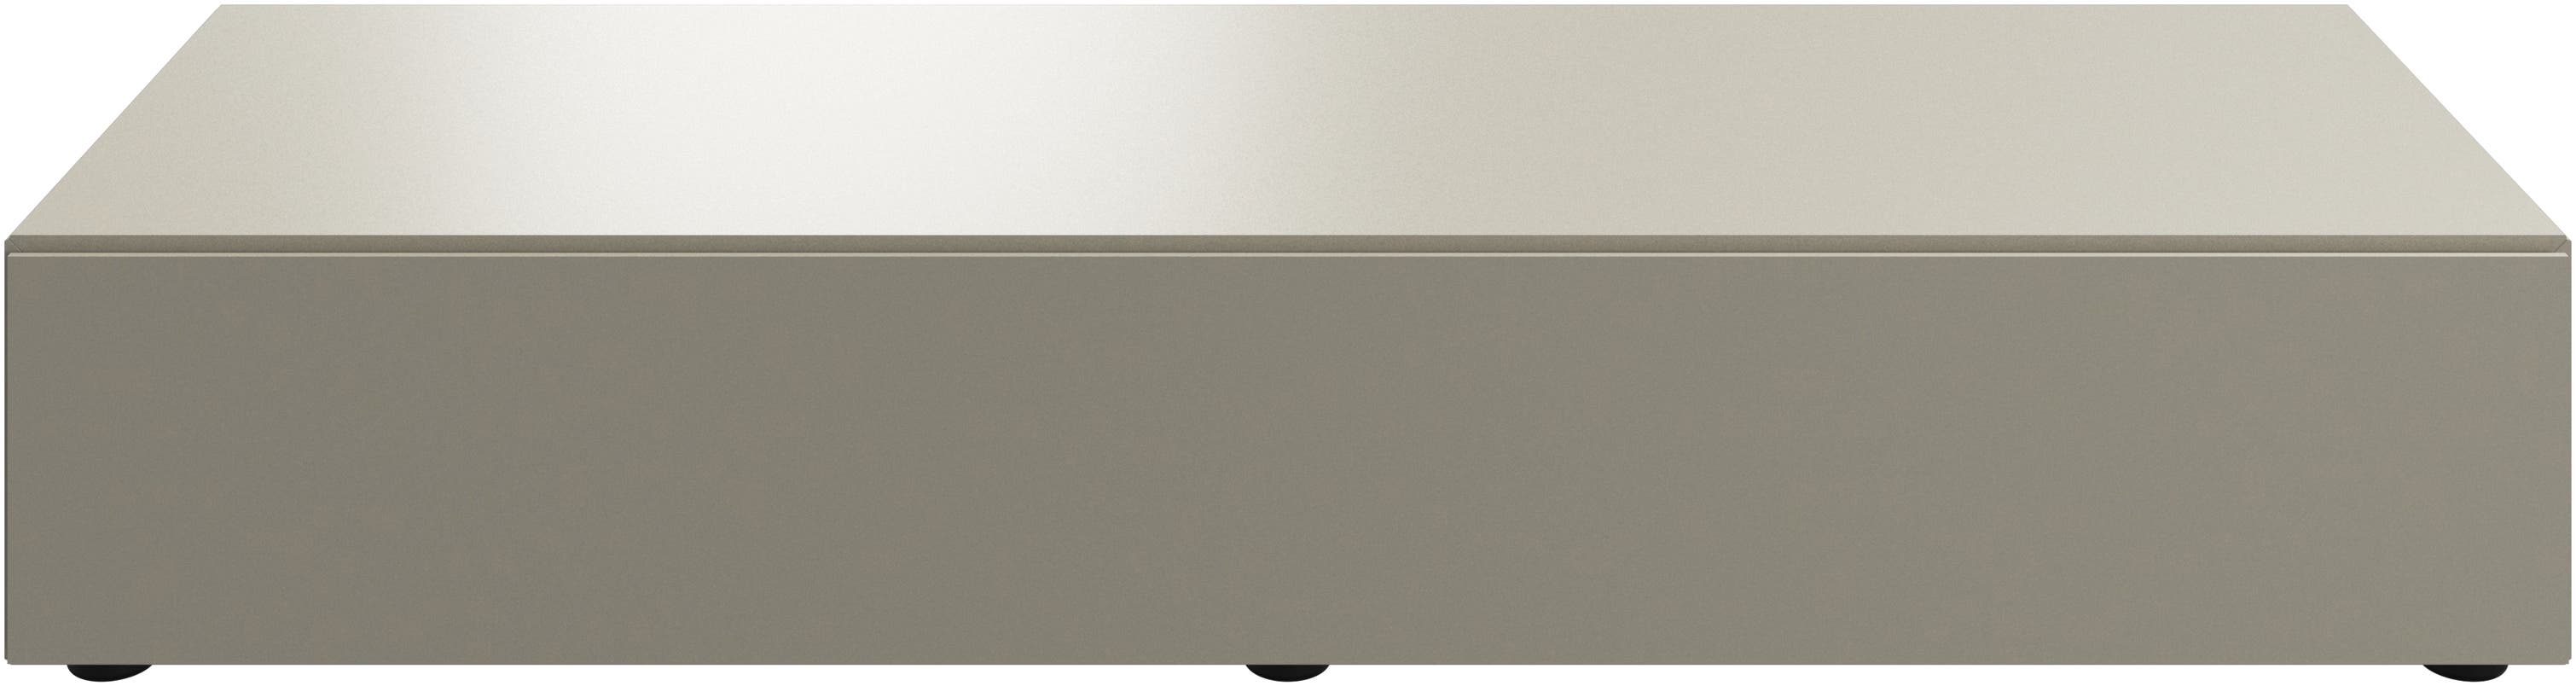 Lugano base cabinet with drop-down doors